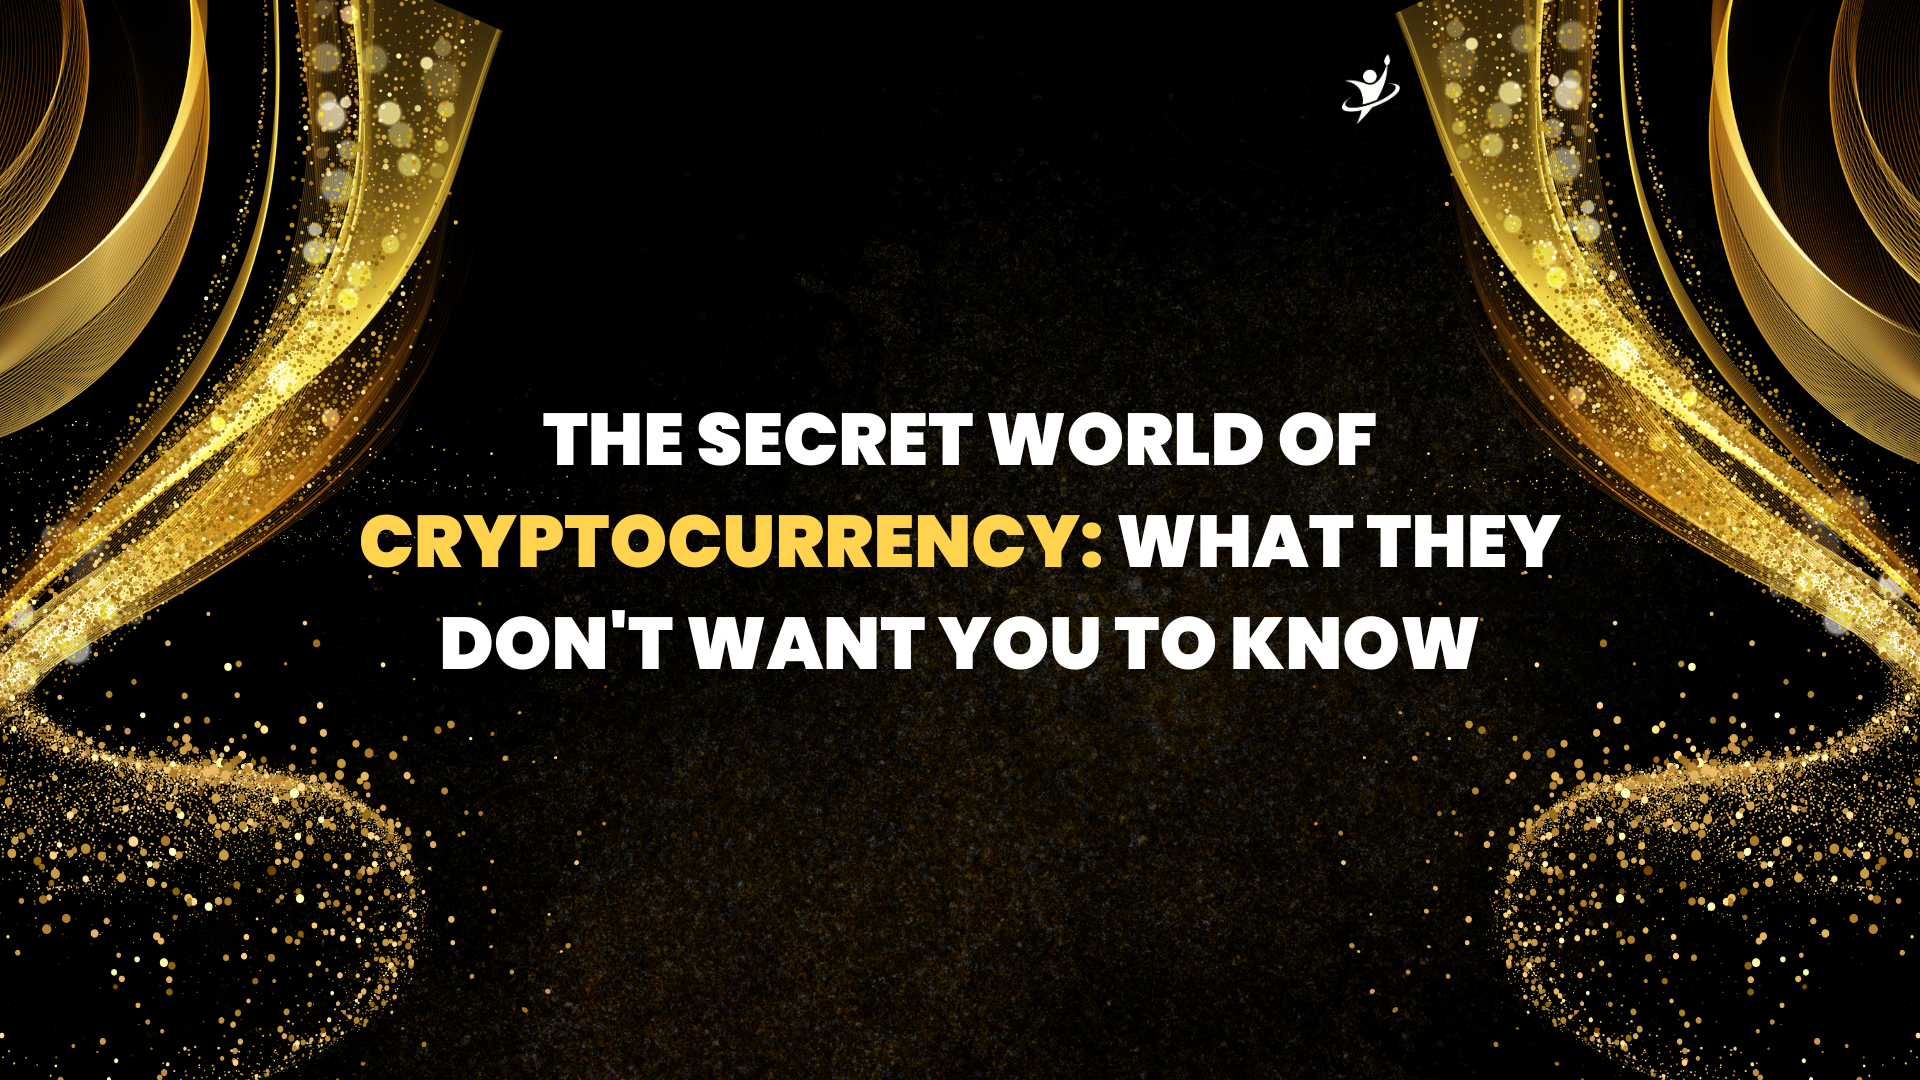 The Secret World of Cryptocurrency